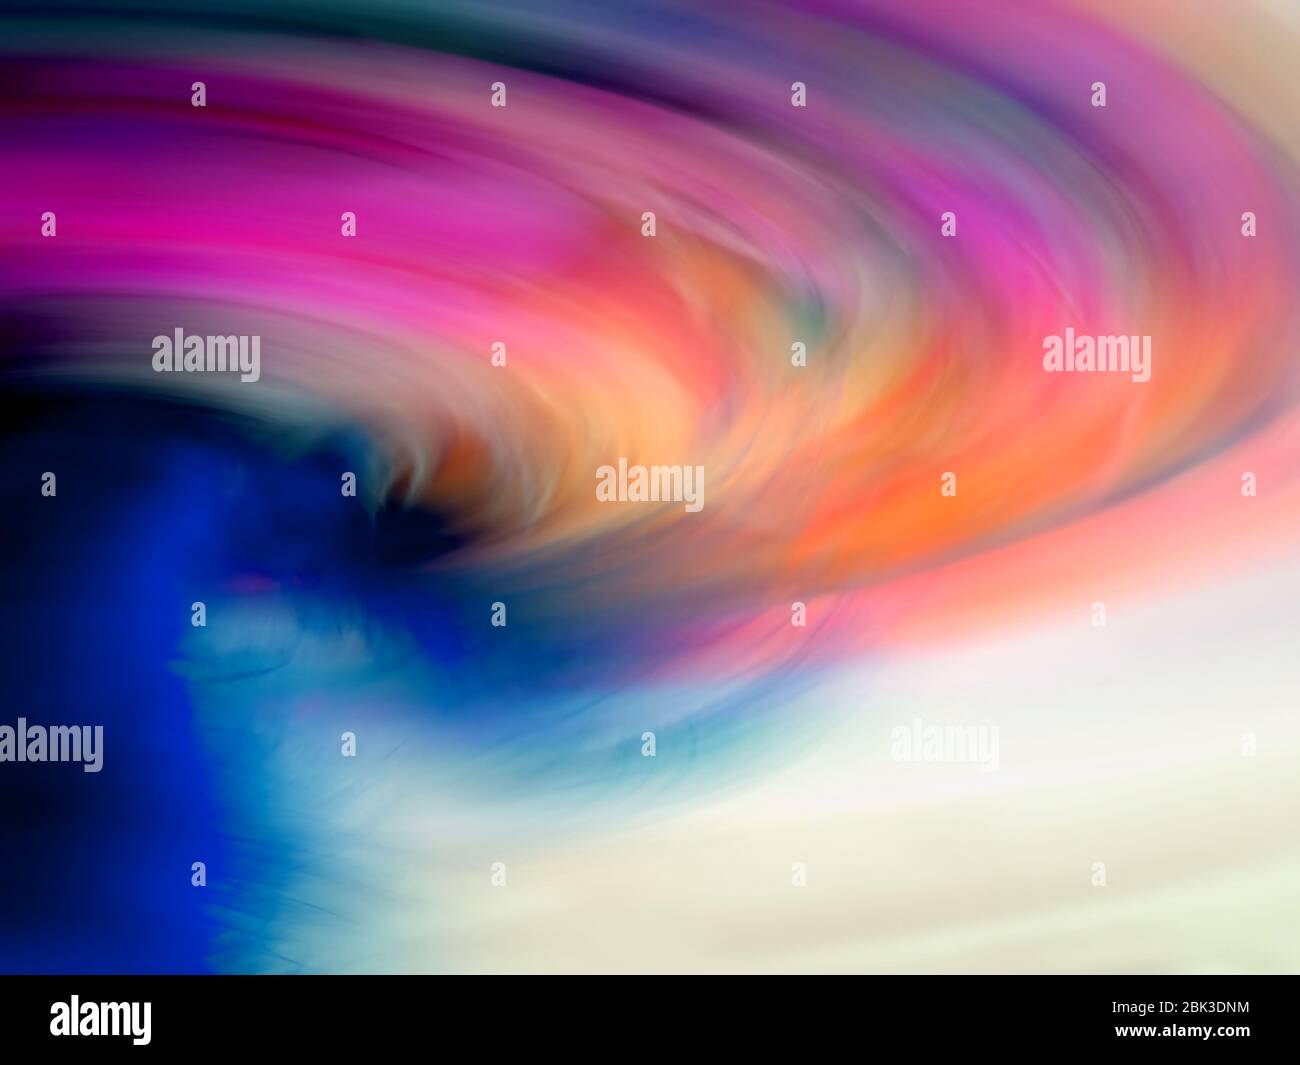 An Abstract Photo of a Tornado Showing the Funnel of the Vortex on a Colourful Background Stock Photo